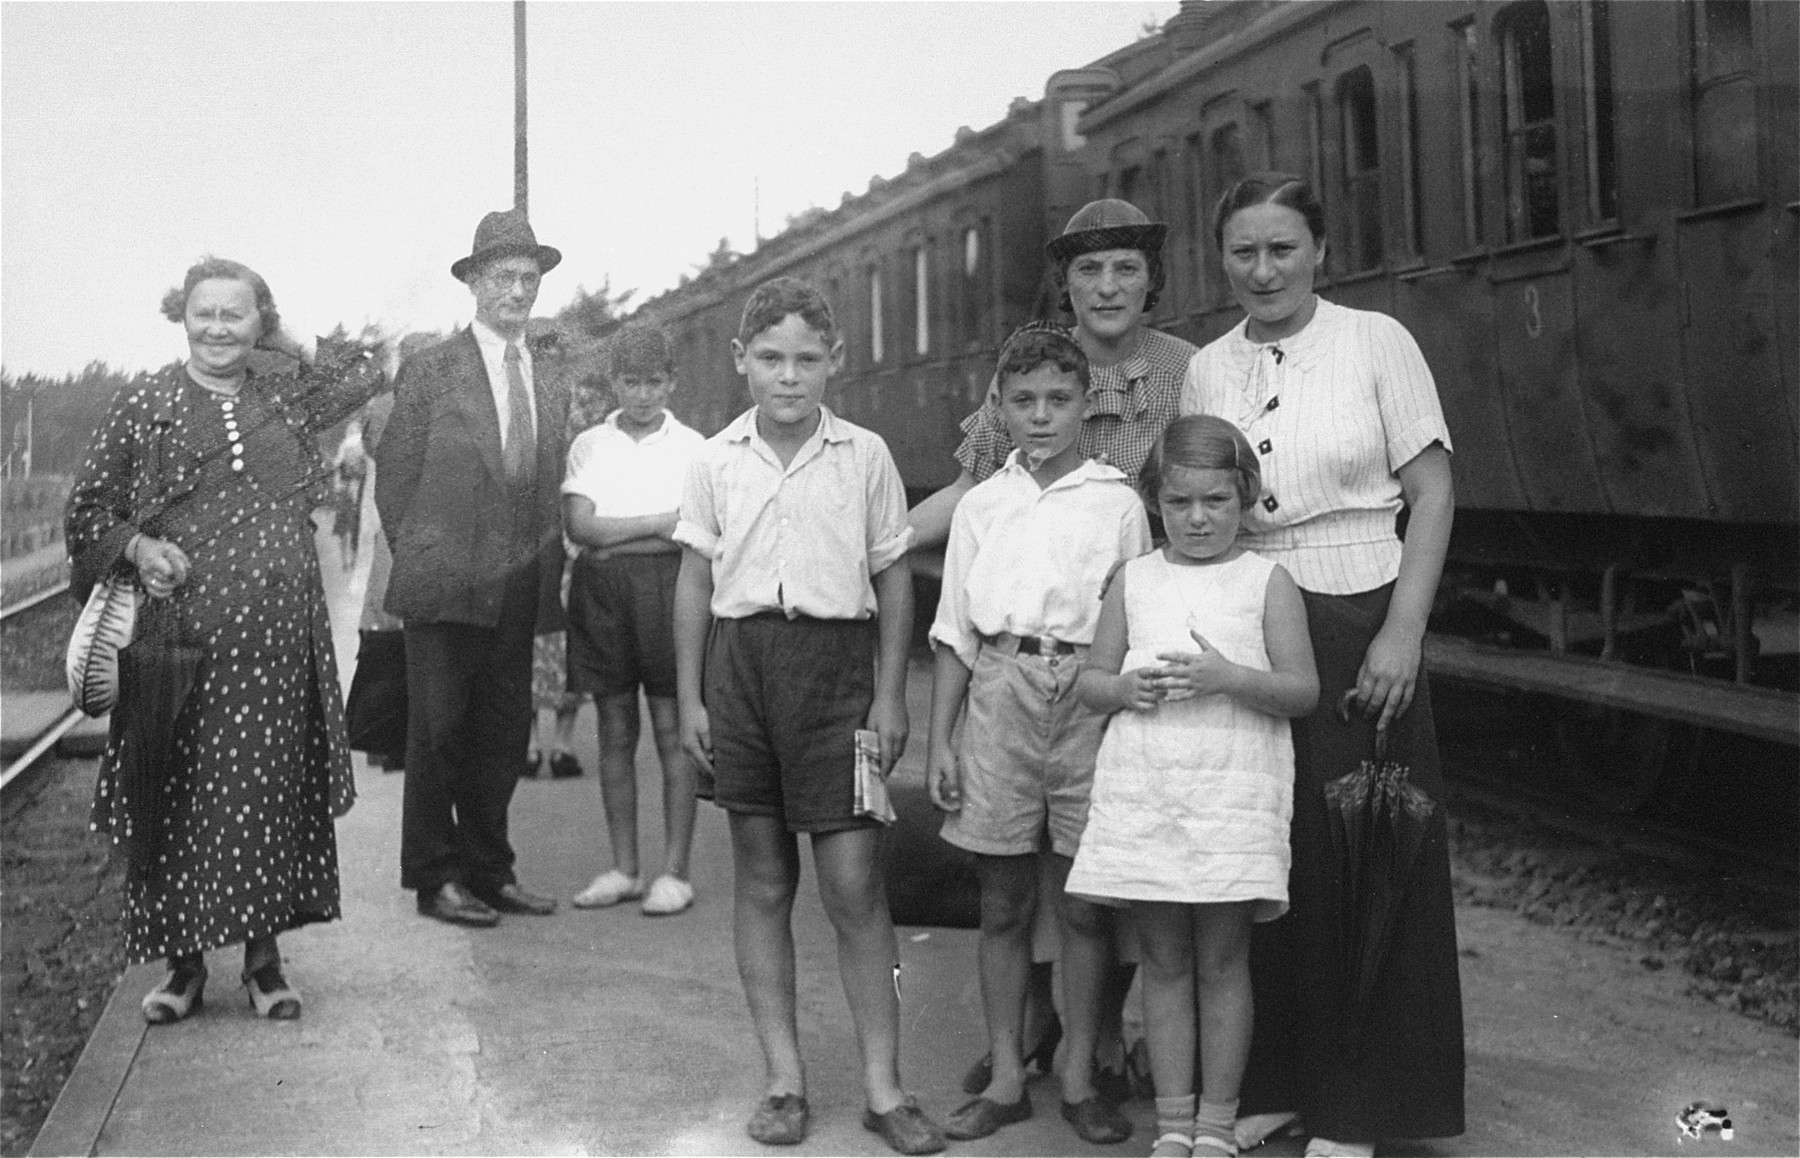 A Jewish family poses at a train station in Riga.

Among those pictured are Debora Nurock and Chassia Rosenthal.